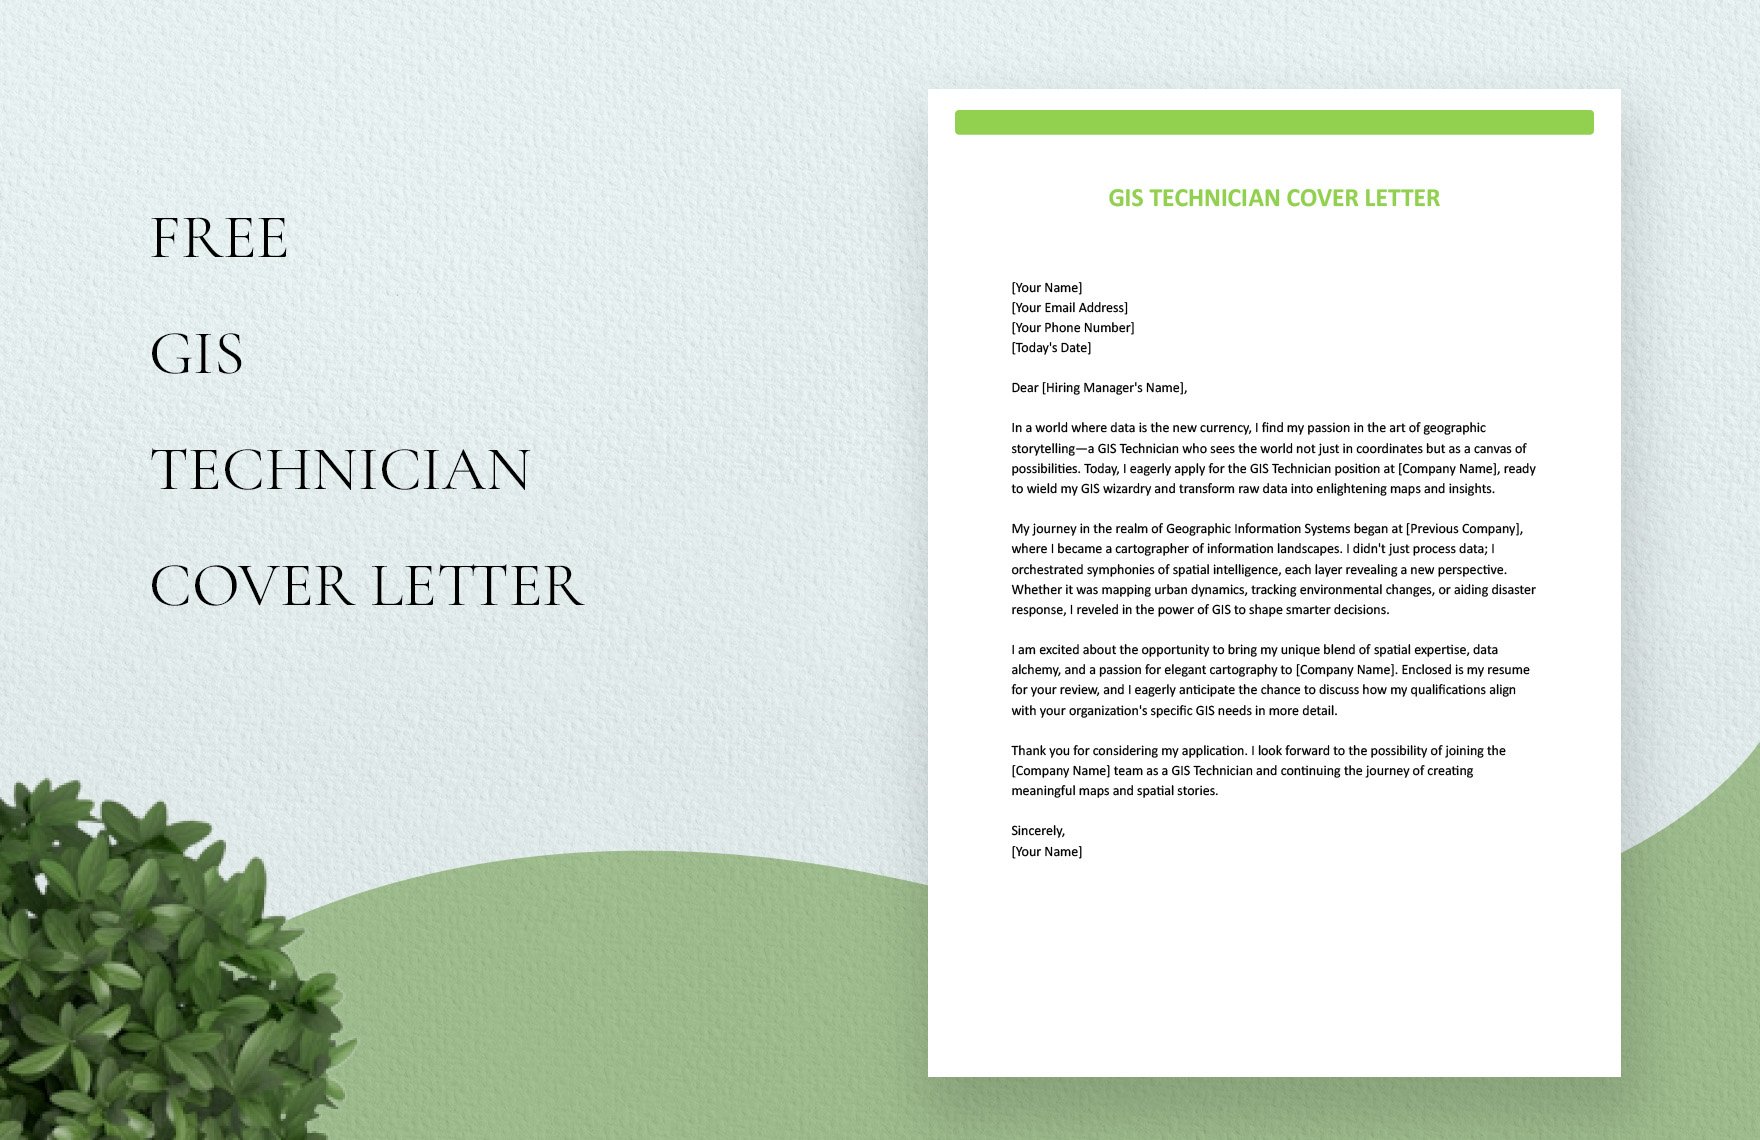 GIS Technician Cover Letter in Word, Google Docs